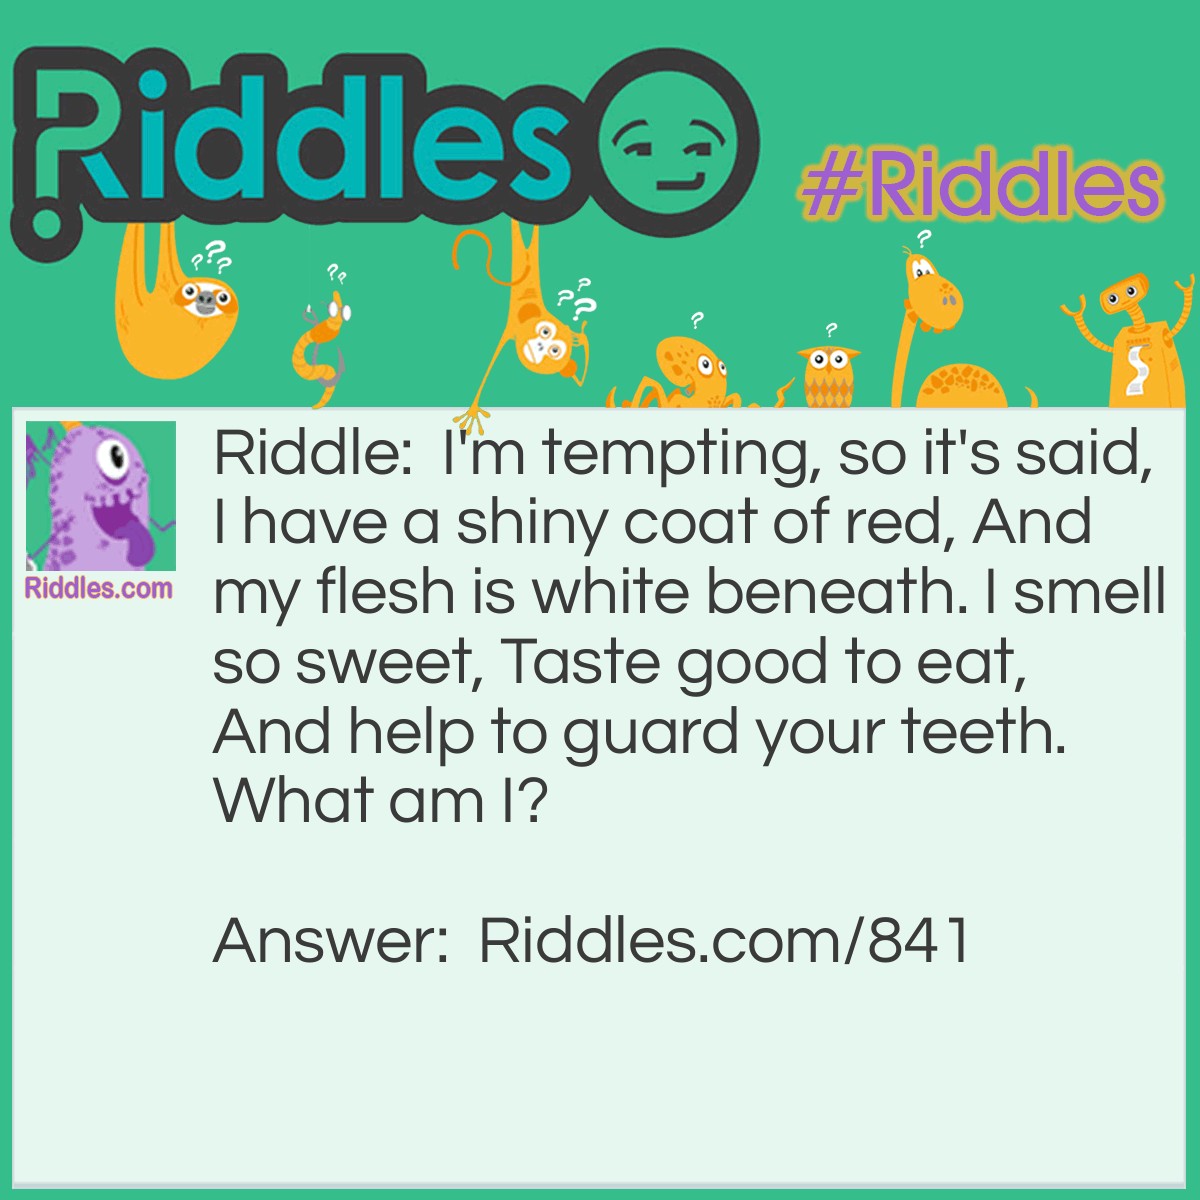 Riddle: I'm tempting, so it's said, I have a shiny coat of red, And my flesh is white beneath. I smell so sweet, Taste good to eat, And help to guard your teeth. 
What am I? Answer: I am an apple!